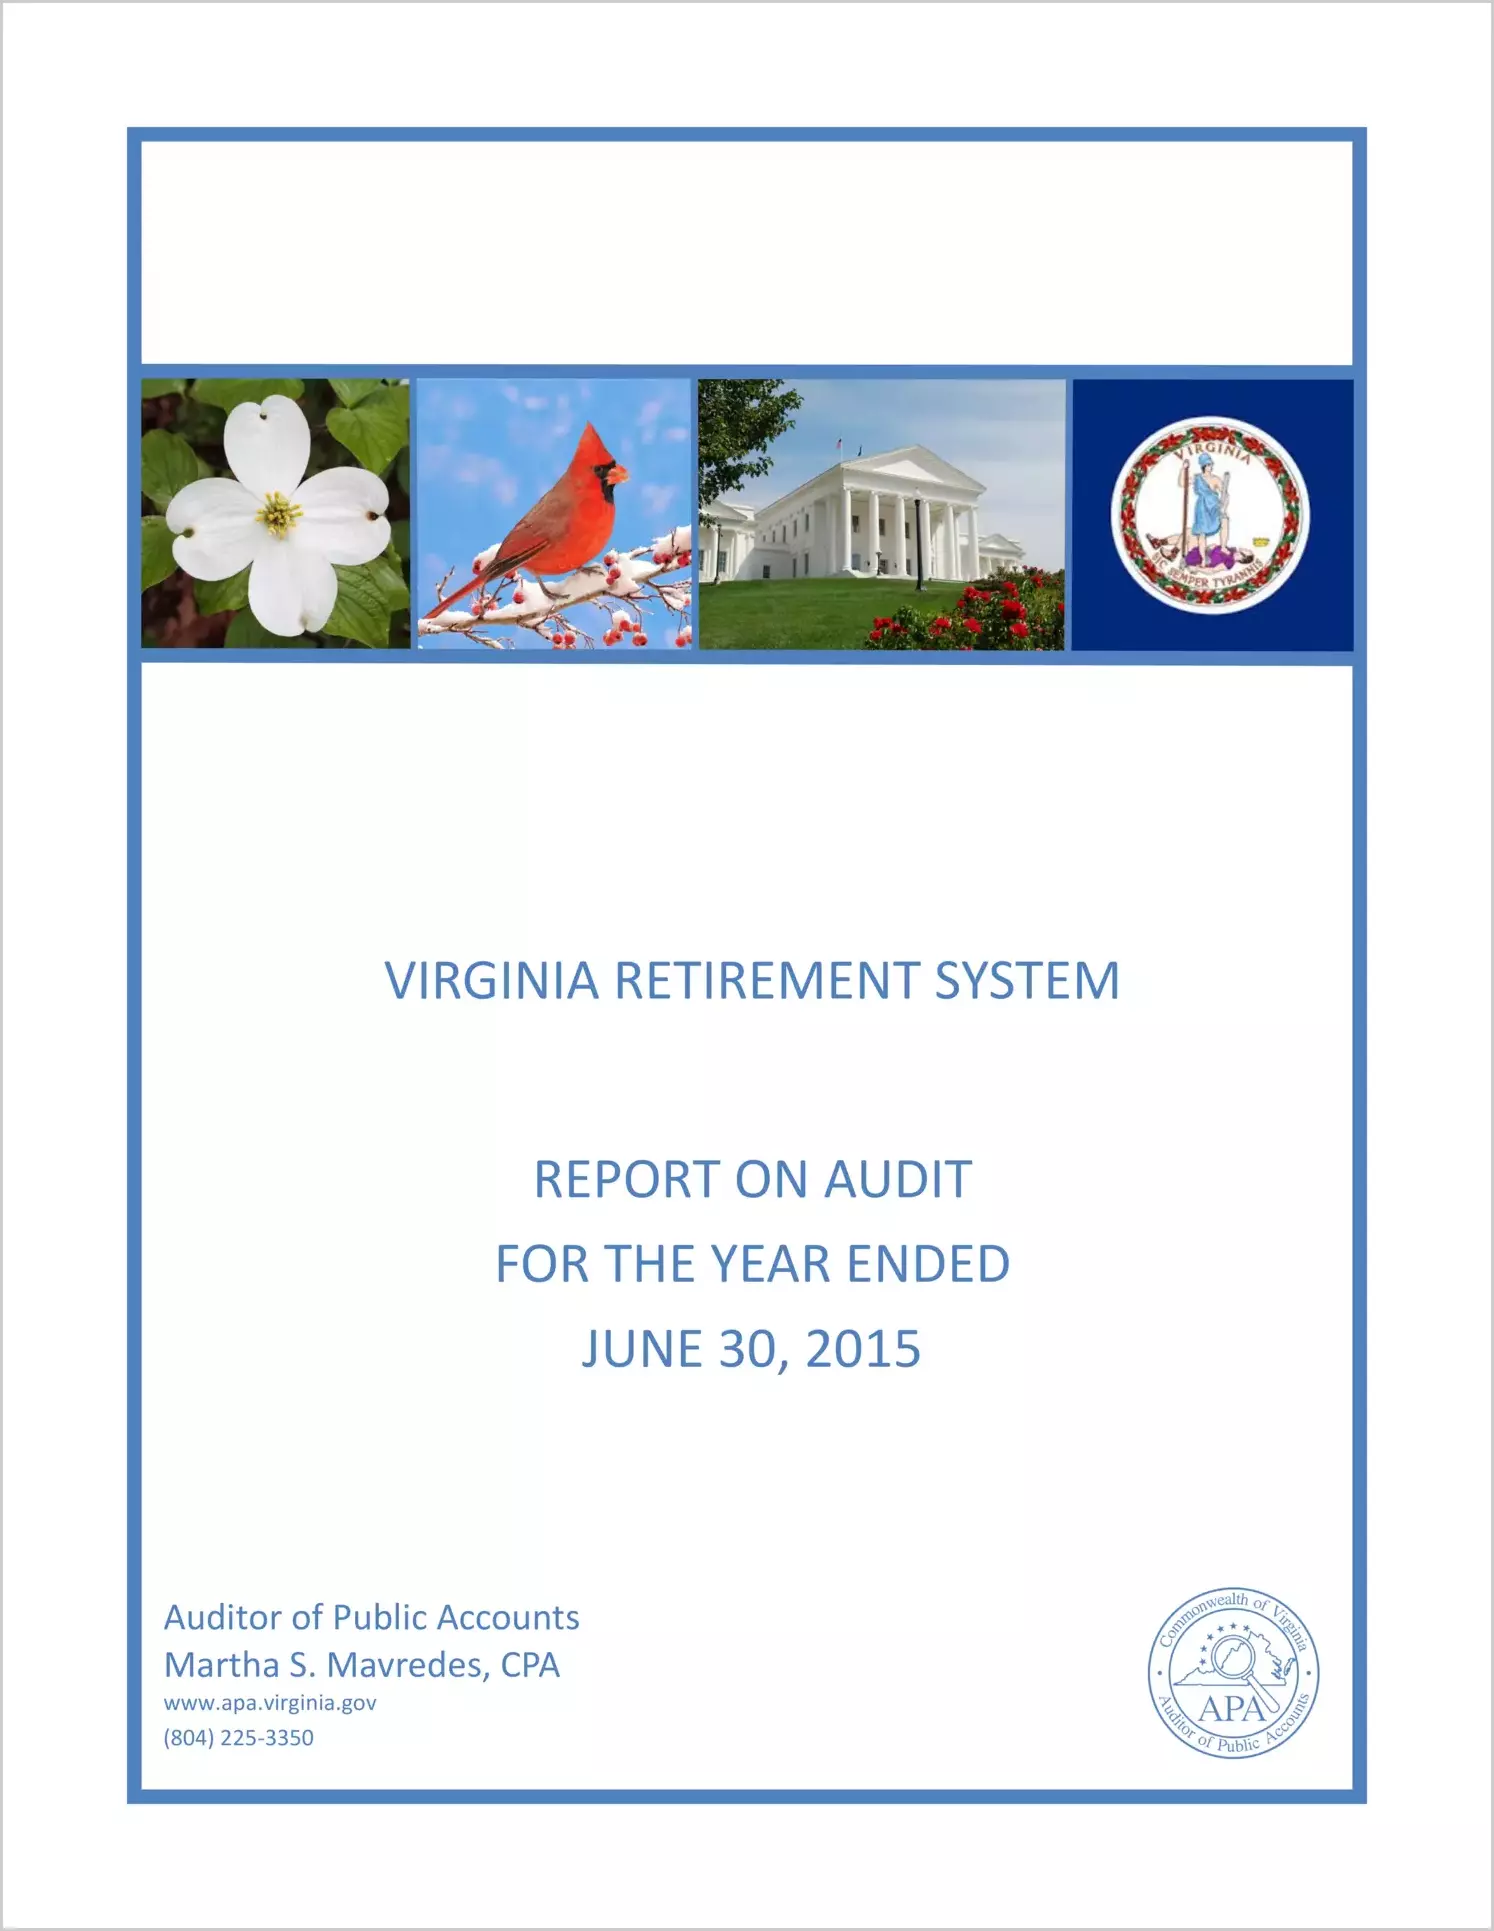 Virginia Retirement System for the year ended June 30, 2015